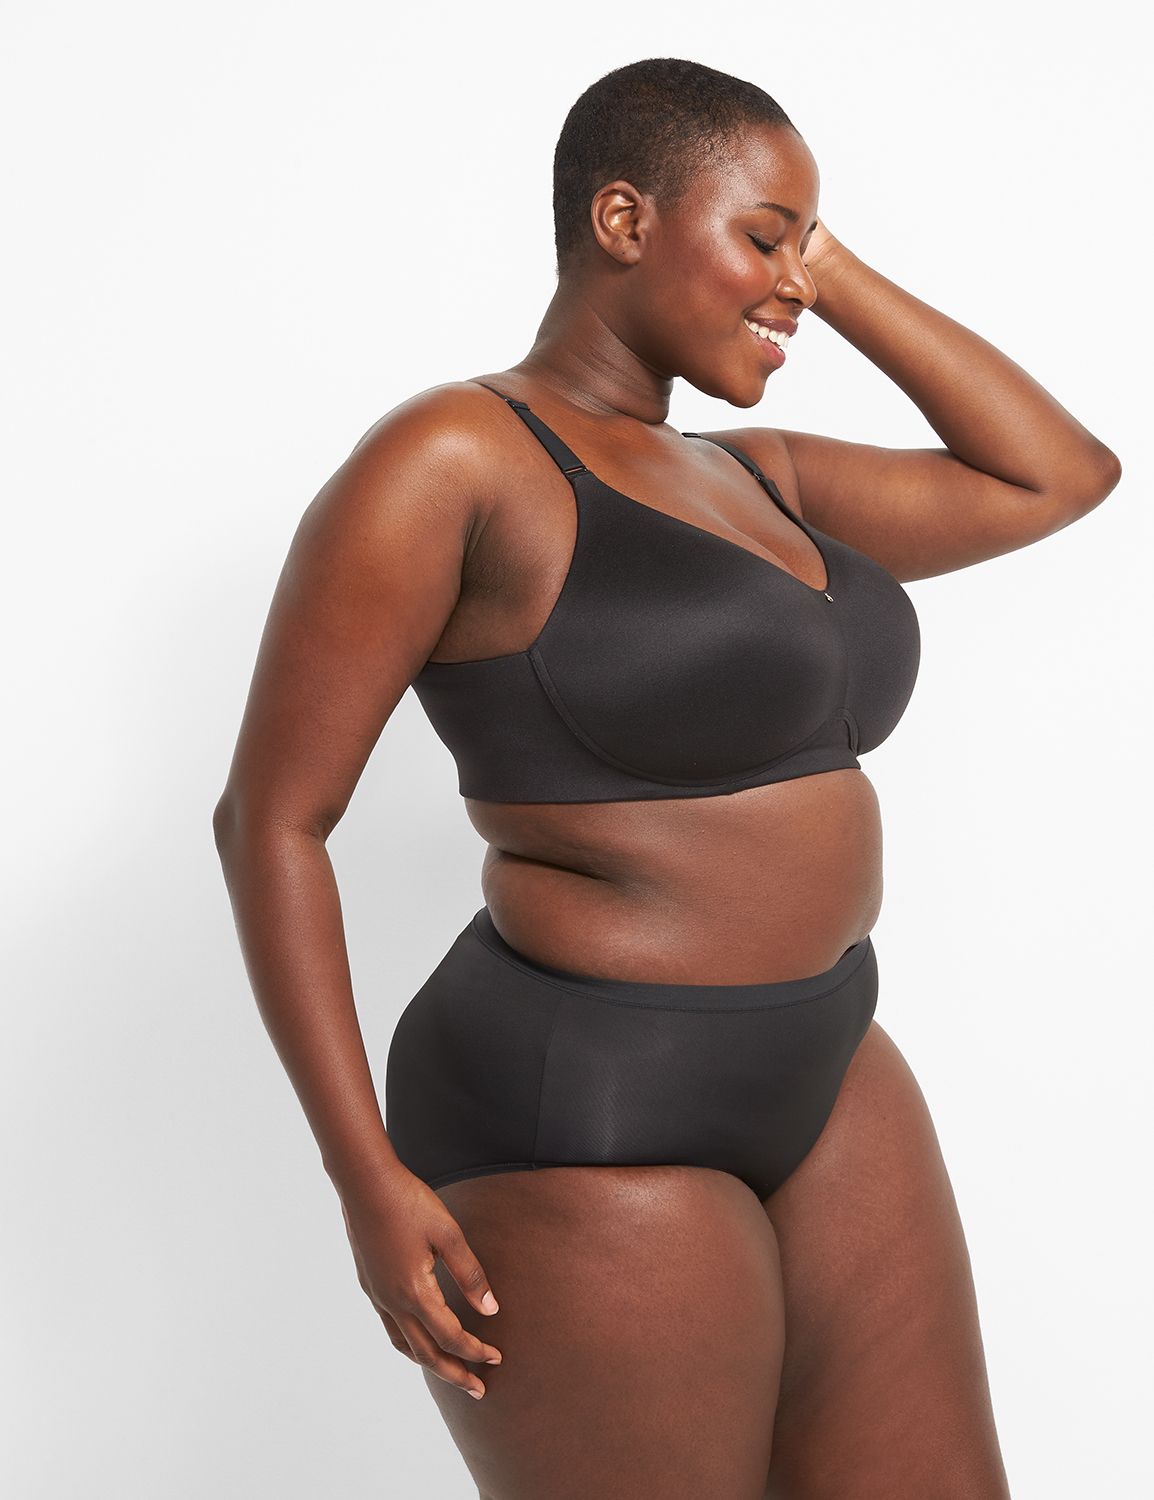 Simply Wire Free, Lane Bryant, Later pokes. Buh-bye pinches. There's a  new way to wire and you. will. love. #Cacique